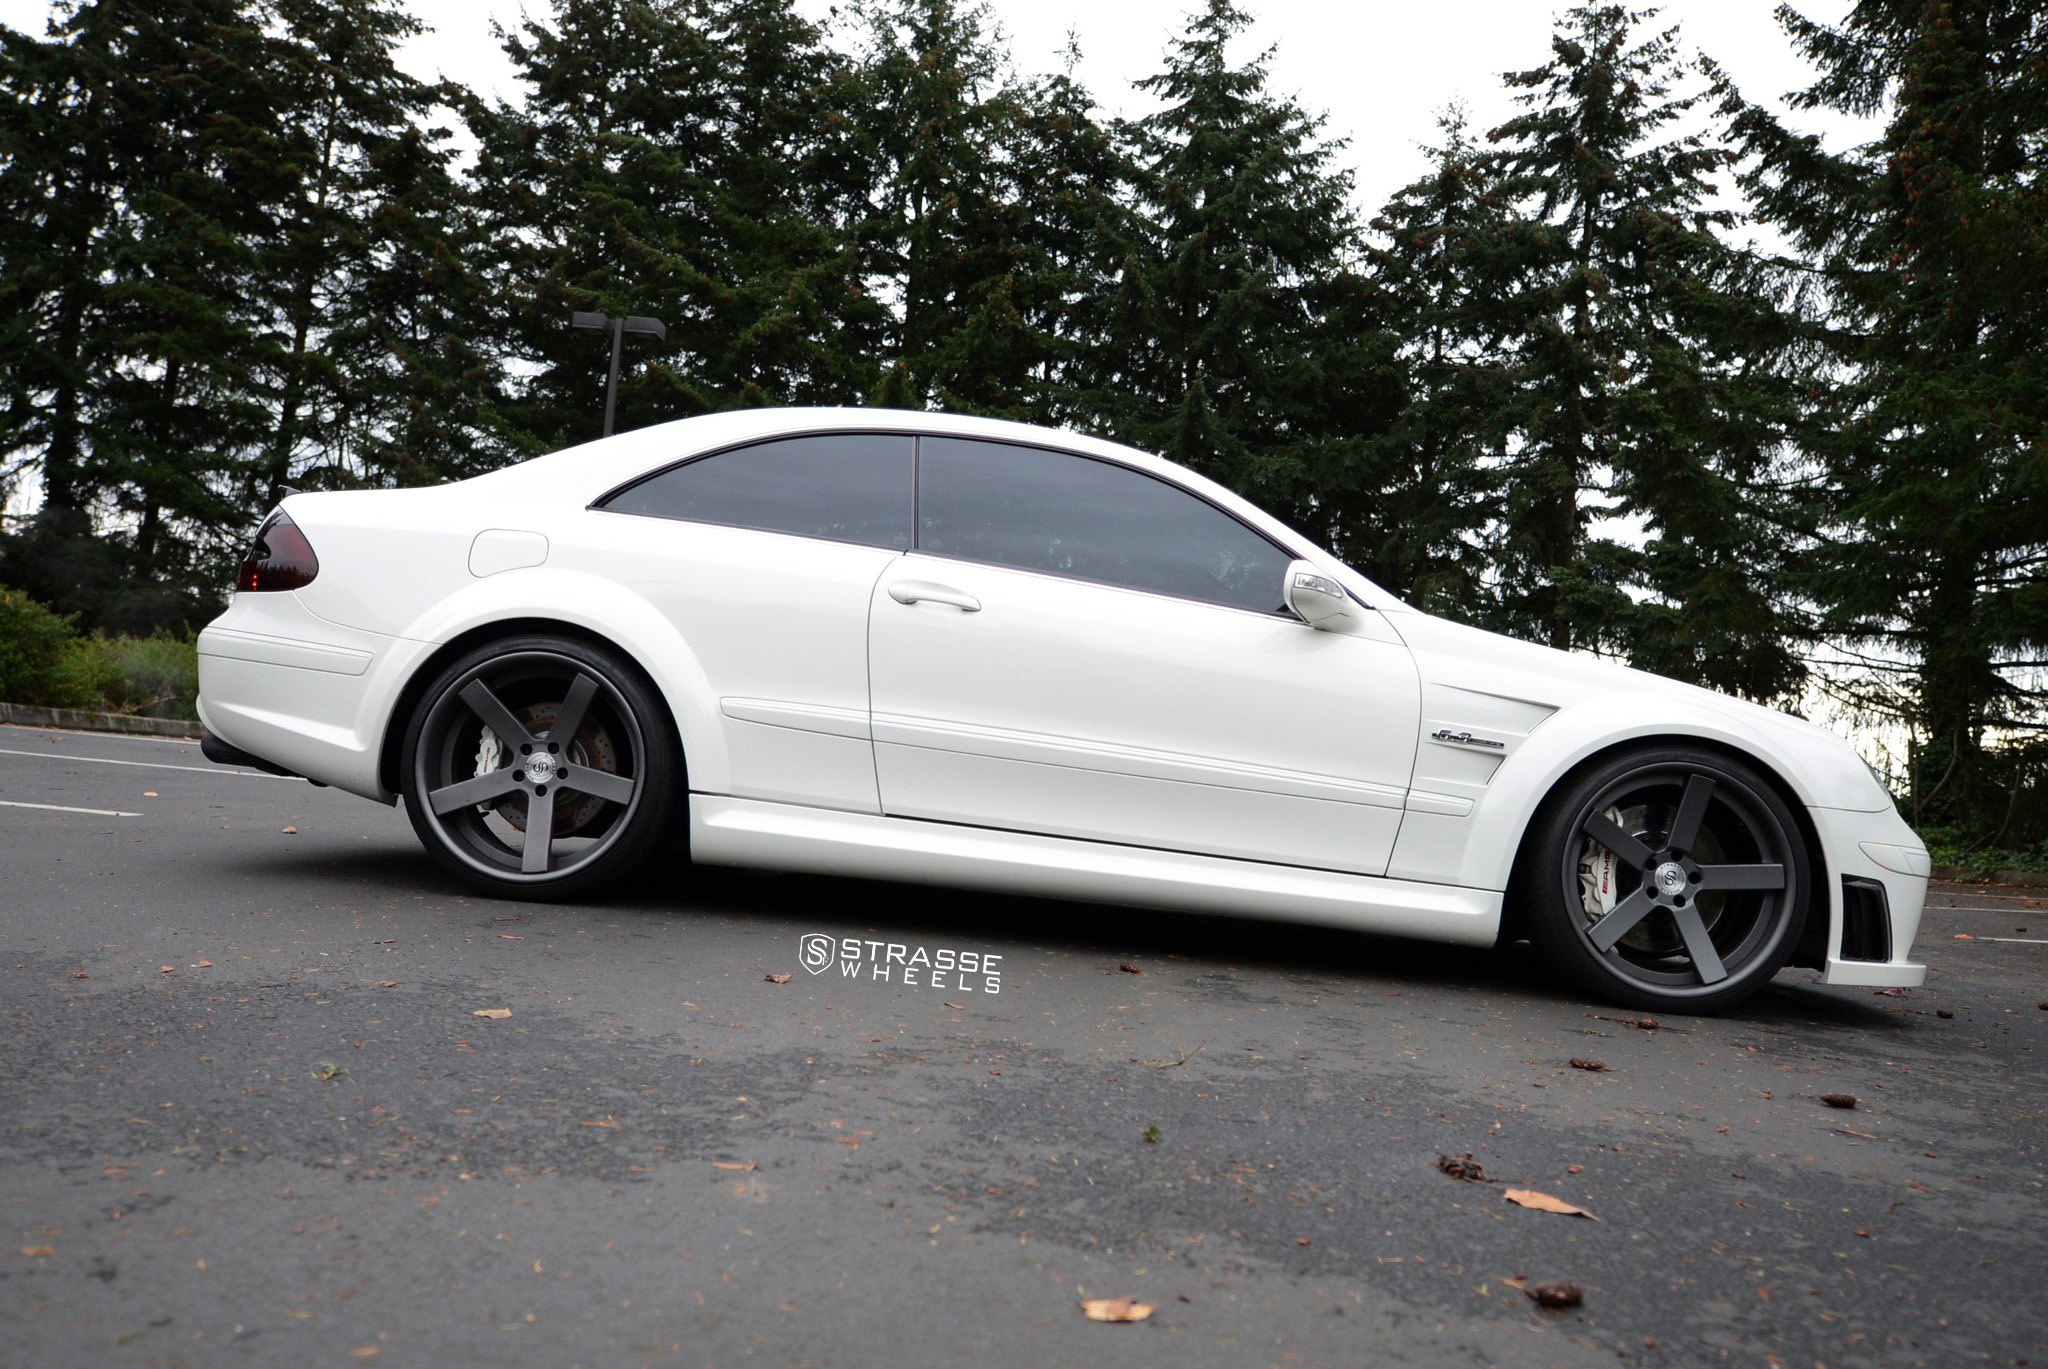 Matte Black Strasse Wheels on White Mercedes CLK-Class - Photo by Strasse Forged